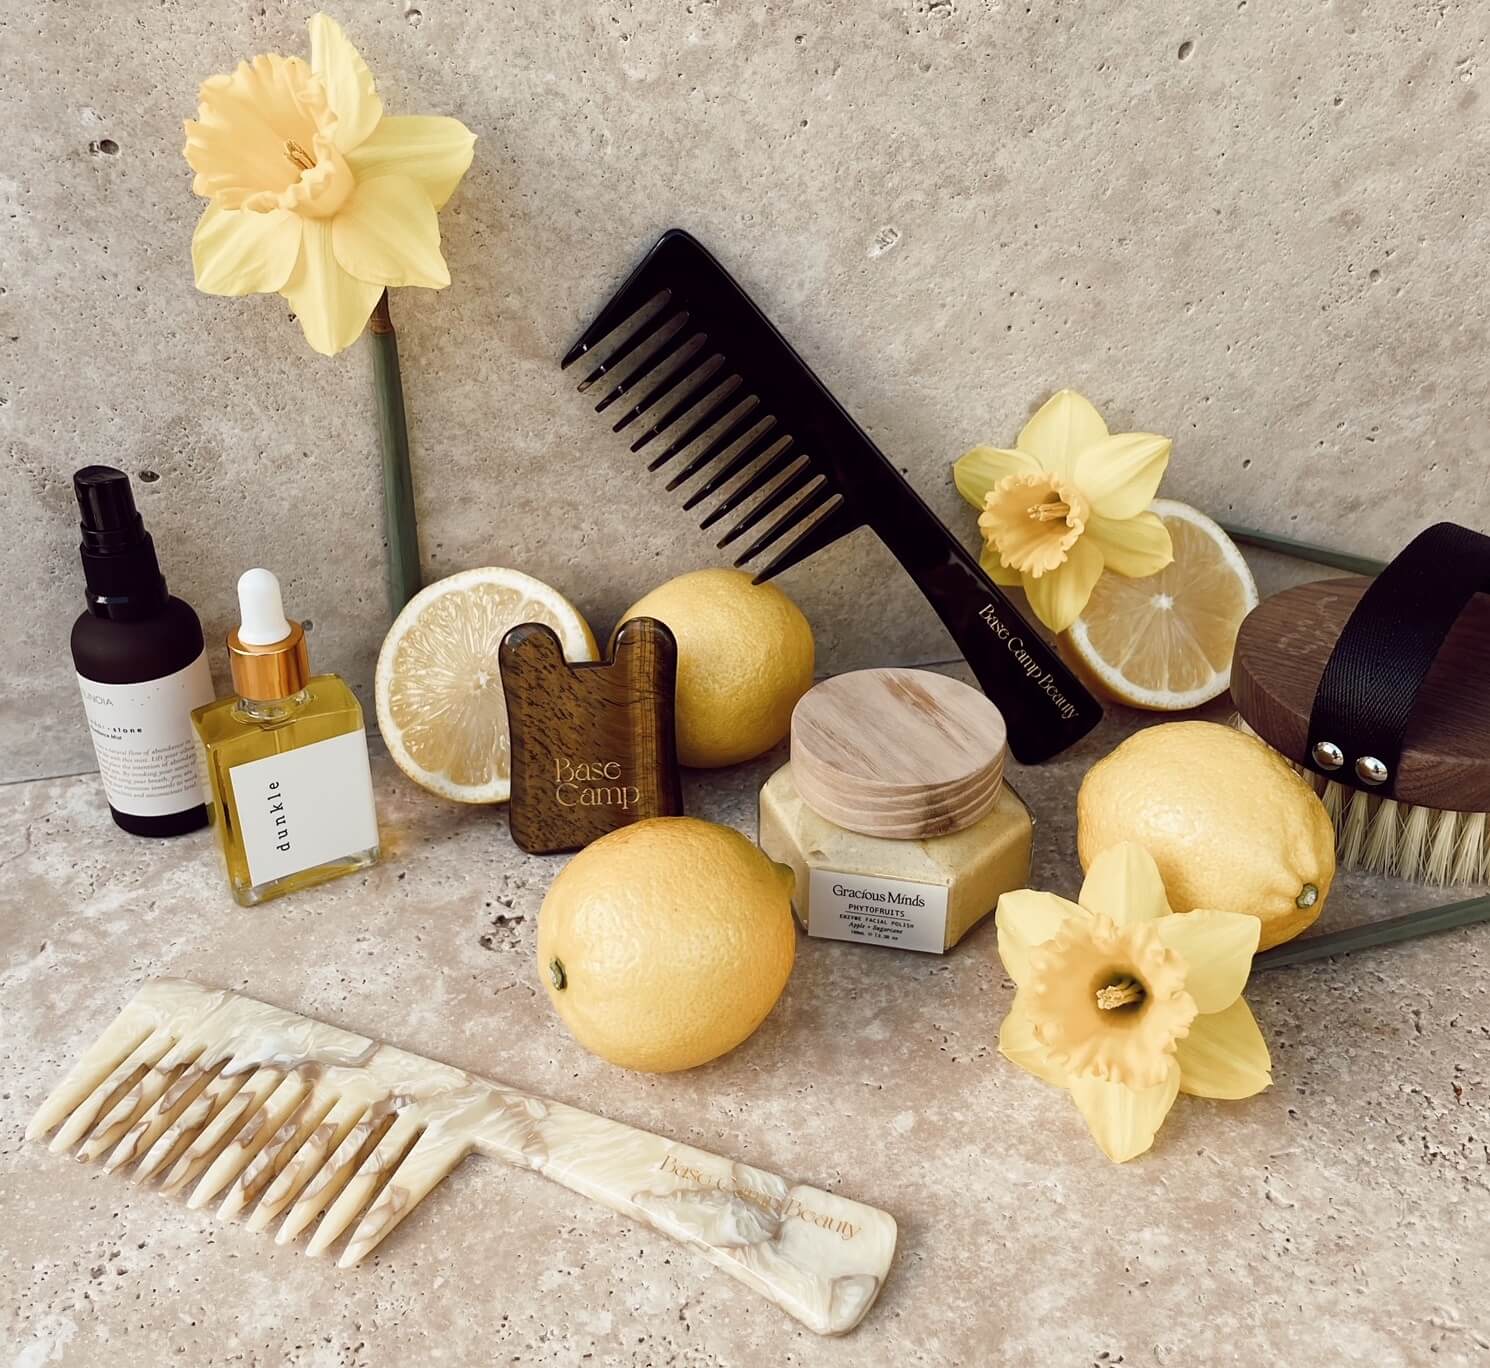 A selection of Self Bloom self-care products to create your own self care rituals. Self-care essentials are beautifully styled with yellow daffodils and lemons.